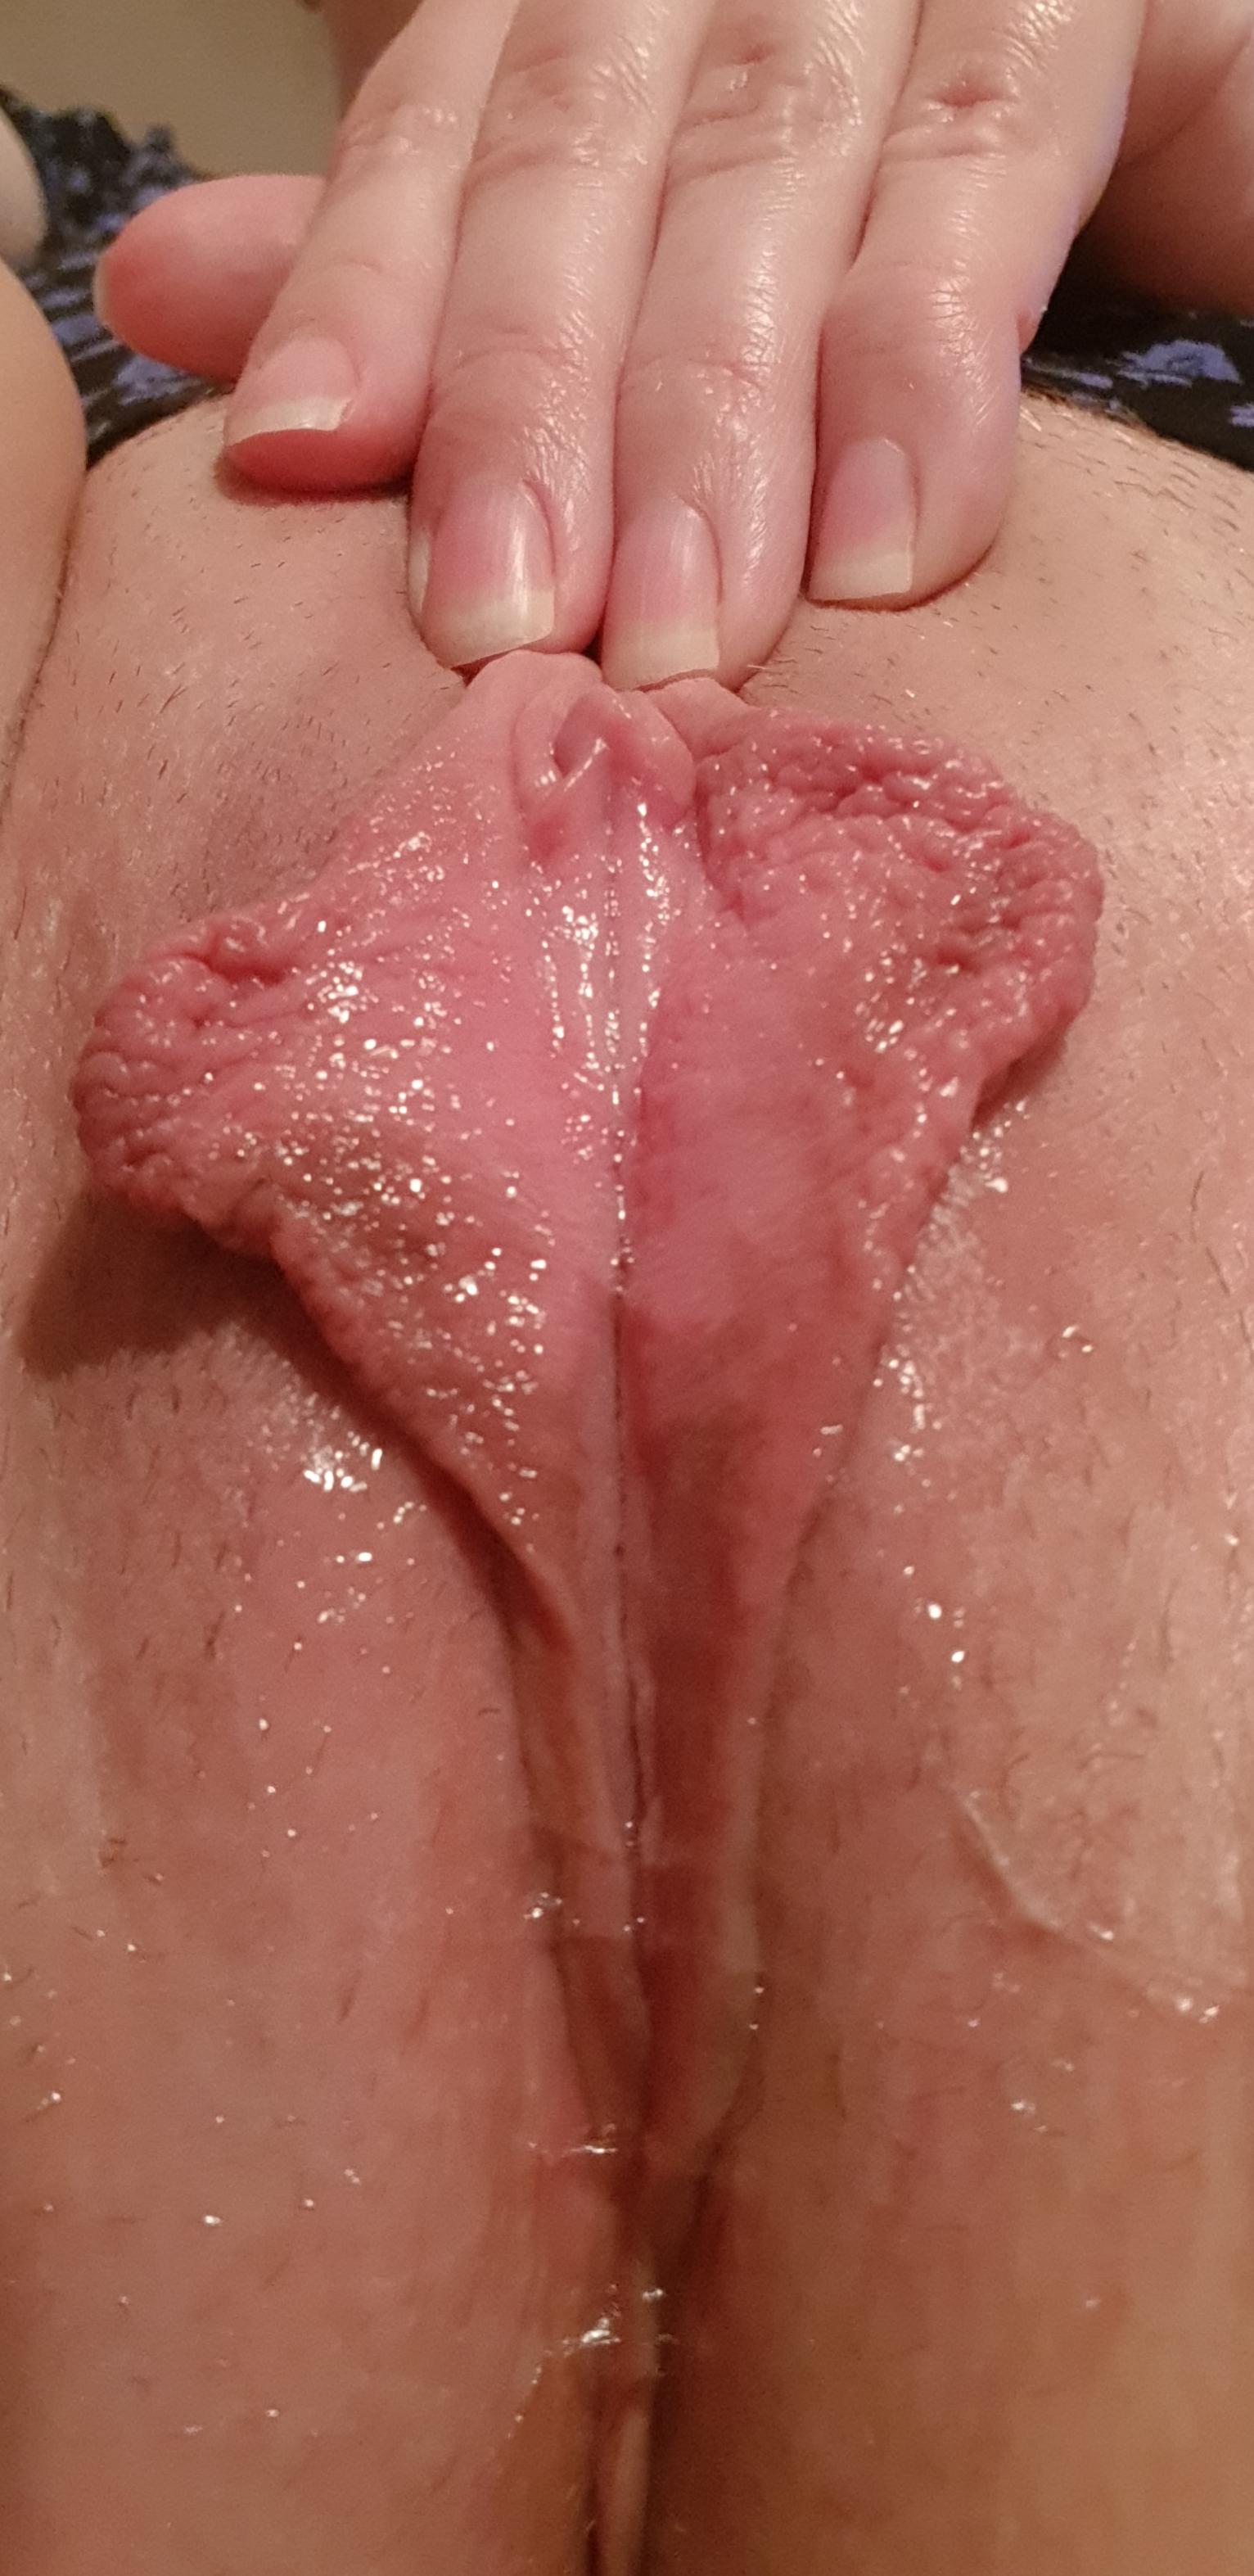 Fat Pussy Lips Hair - Do you like really wet pussy lips